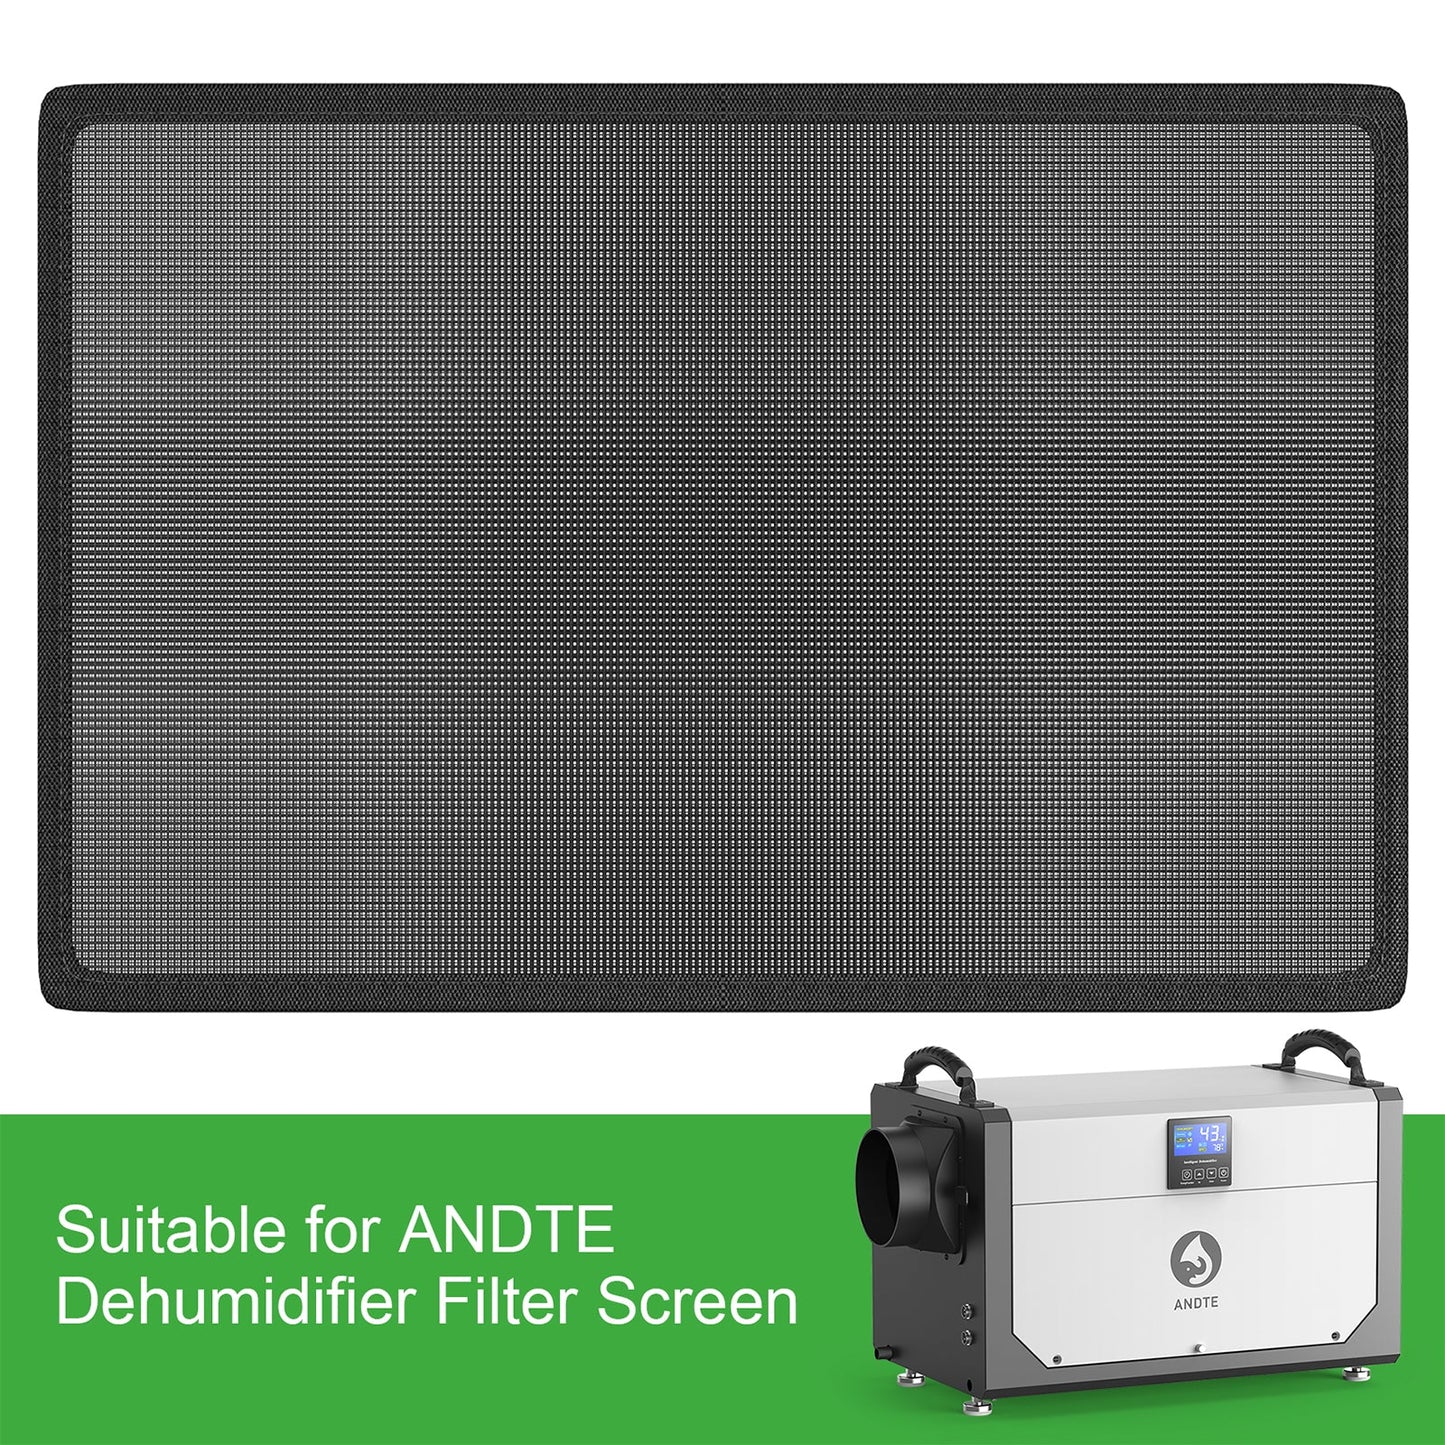 ANDTE Commercial Dehumidifier DY155 Filter, 1 Pack